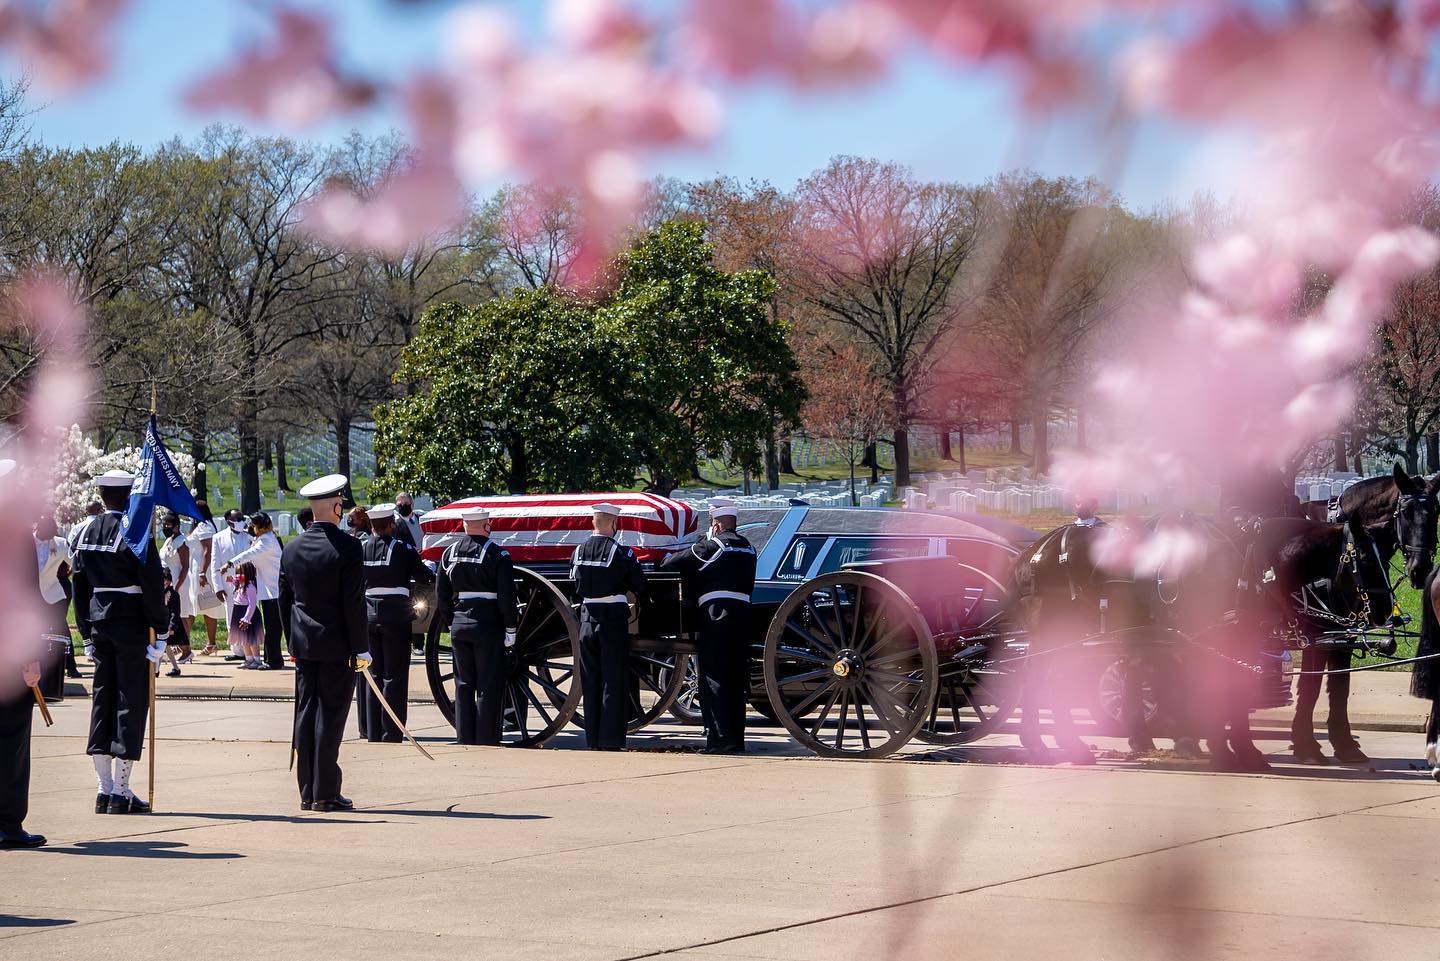 Marshall Drive Transfer at Arlington National Cemetery during a Full Honors Funeral Service earlier this week, surrounded by blooming cherry blossom trees and magnolias.

Full honors funerals begin at a designated place, called a transfer point. A team of soldiers transfers the casket to the caisson at the transfer point, before proceeding to the gravesite and the heroes final resting place.

Following the transfer, a military band plays a reverent march, leading six horses as they pull a flag-draped casket through tree-lined lanes of Arlington National Cemetery.